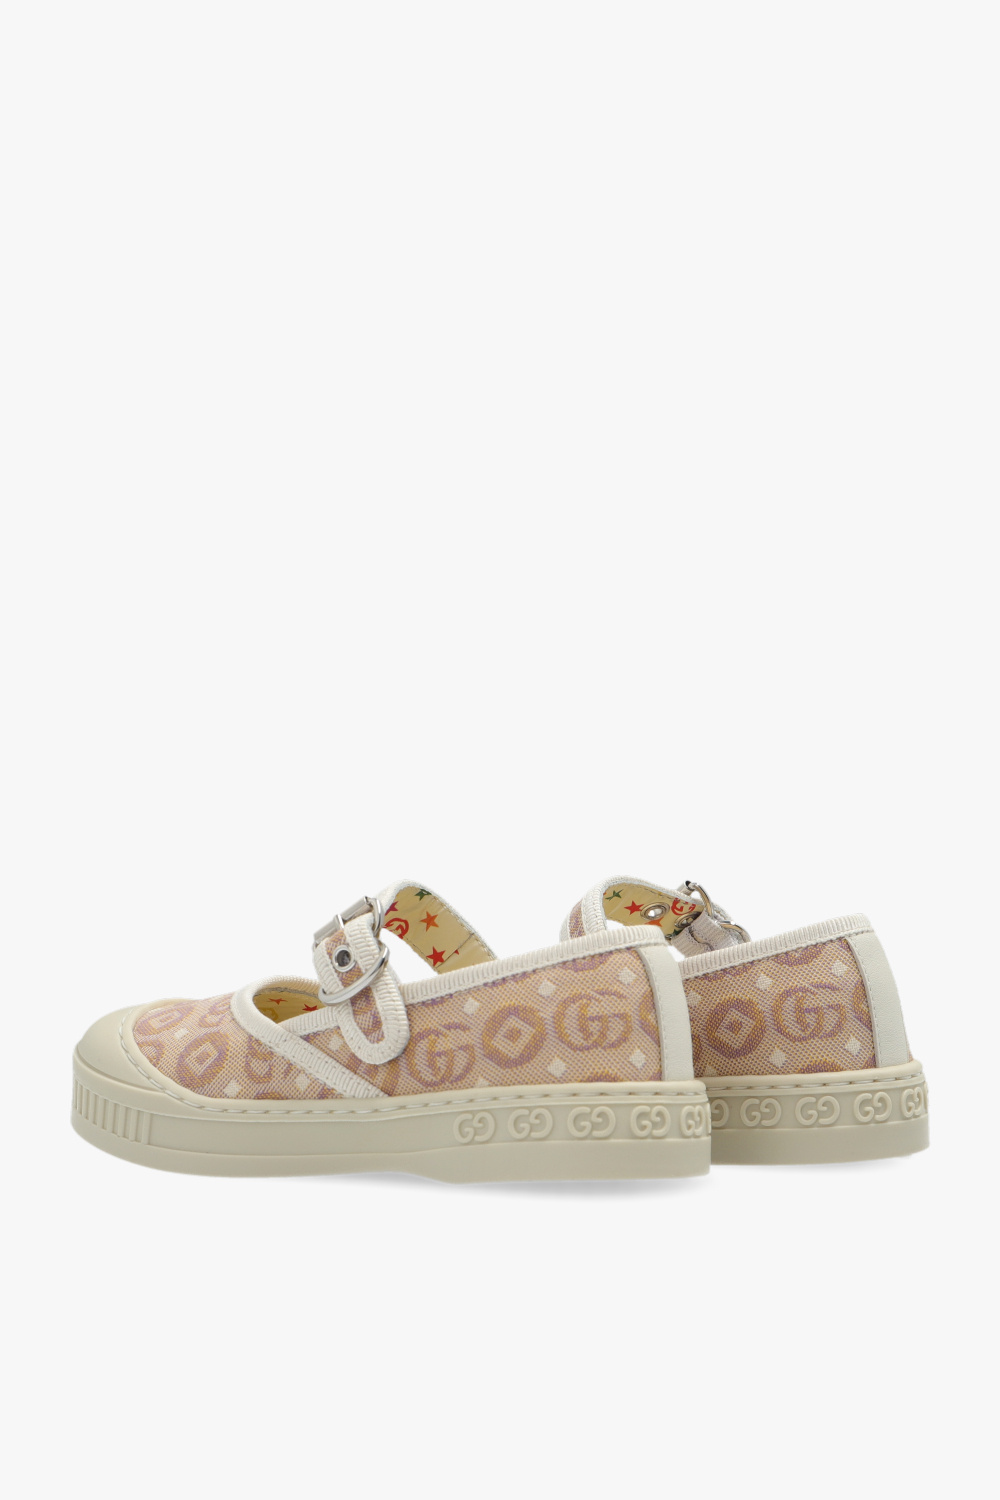 gucci bag Kids Boots with logo